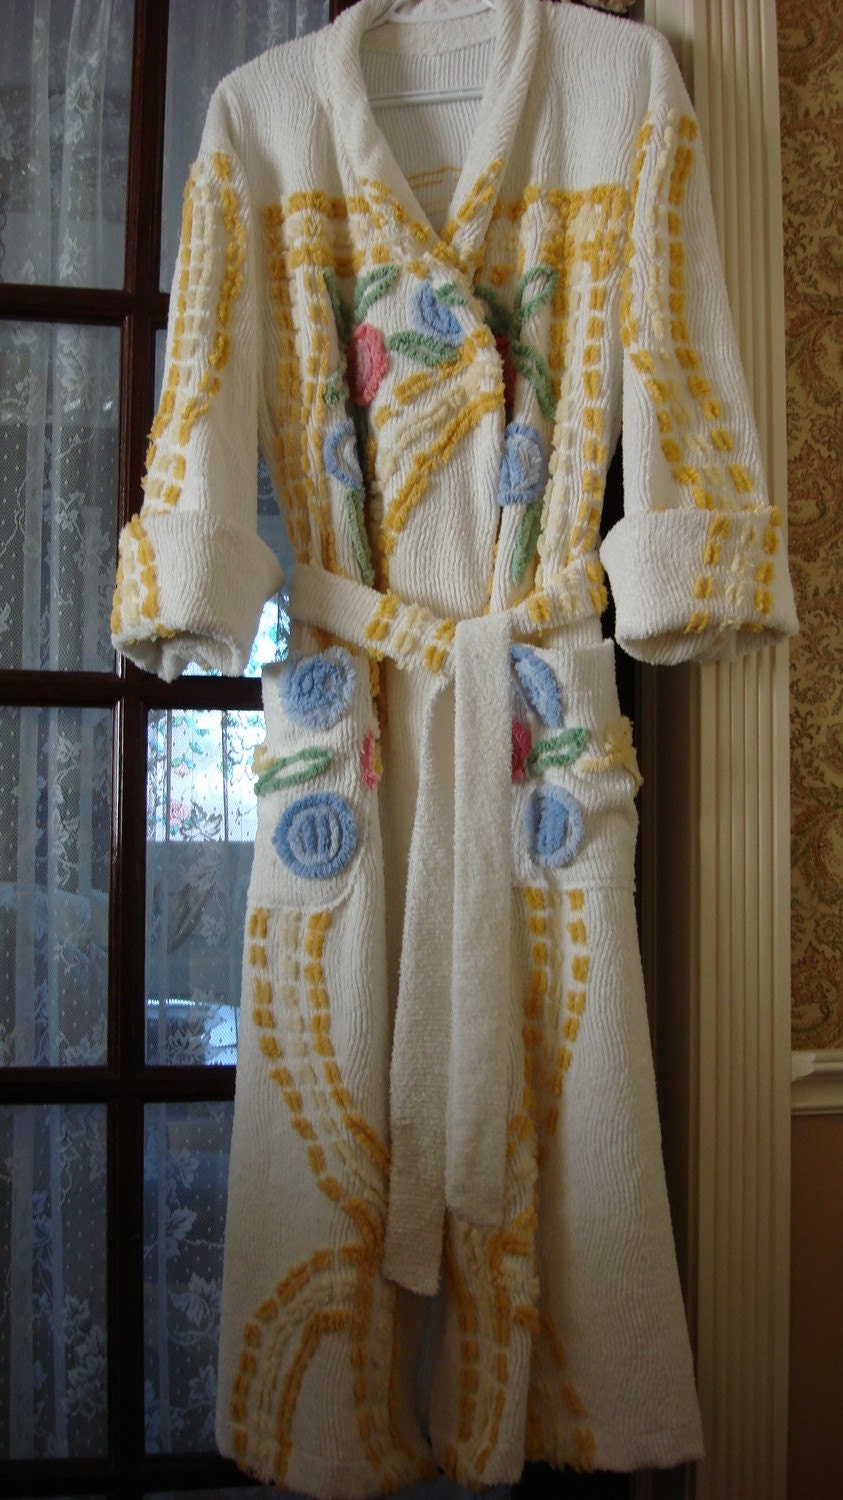 Vintage Chenille Robe Handmade One of a Kind by MemoriesToTouch